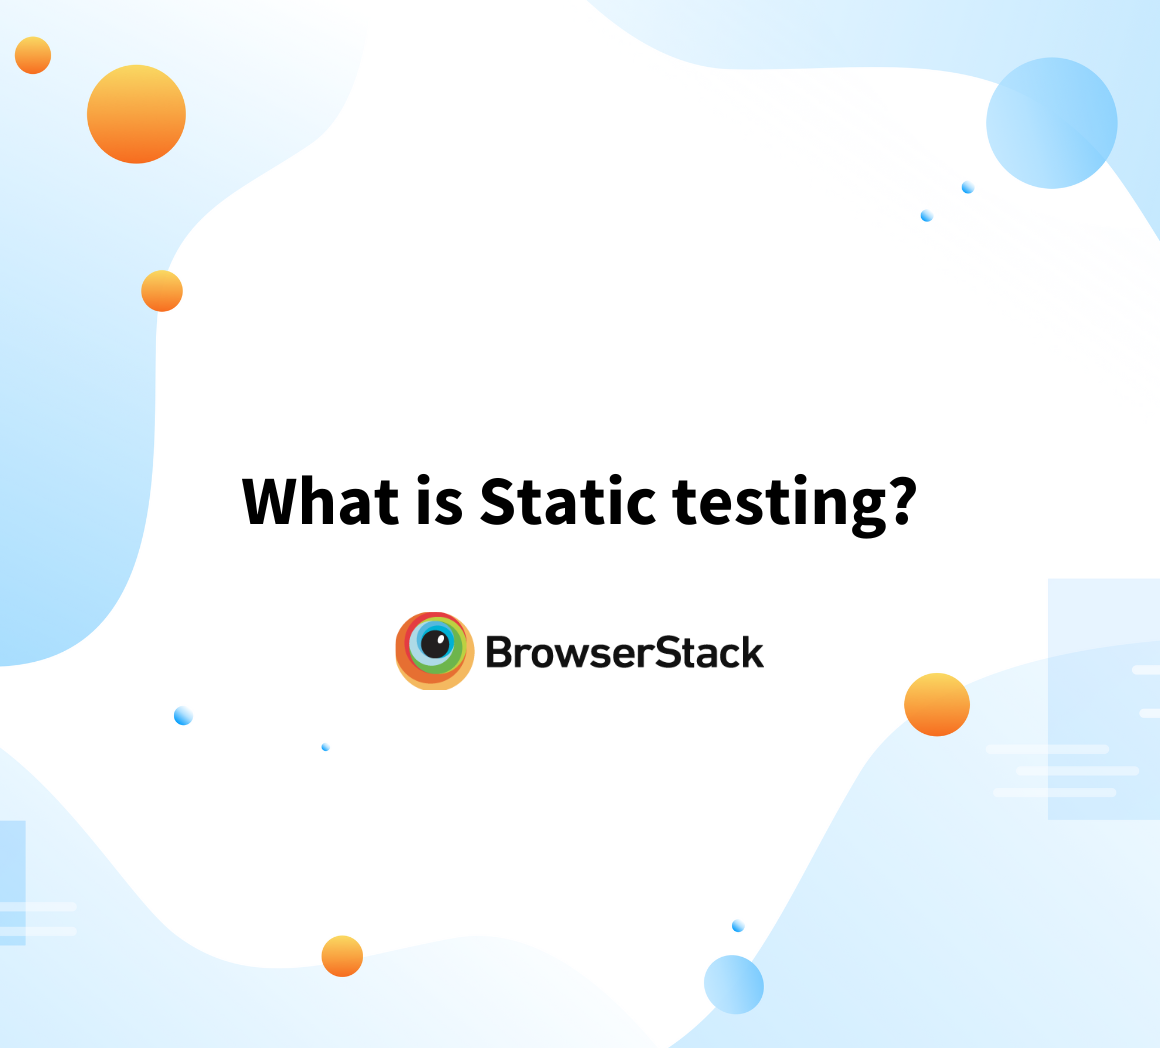 What is Static testing